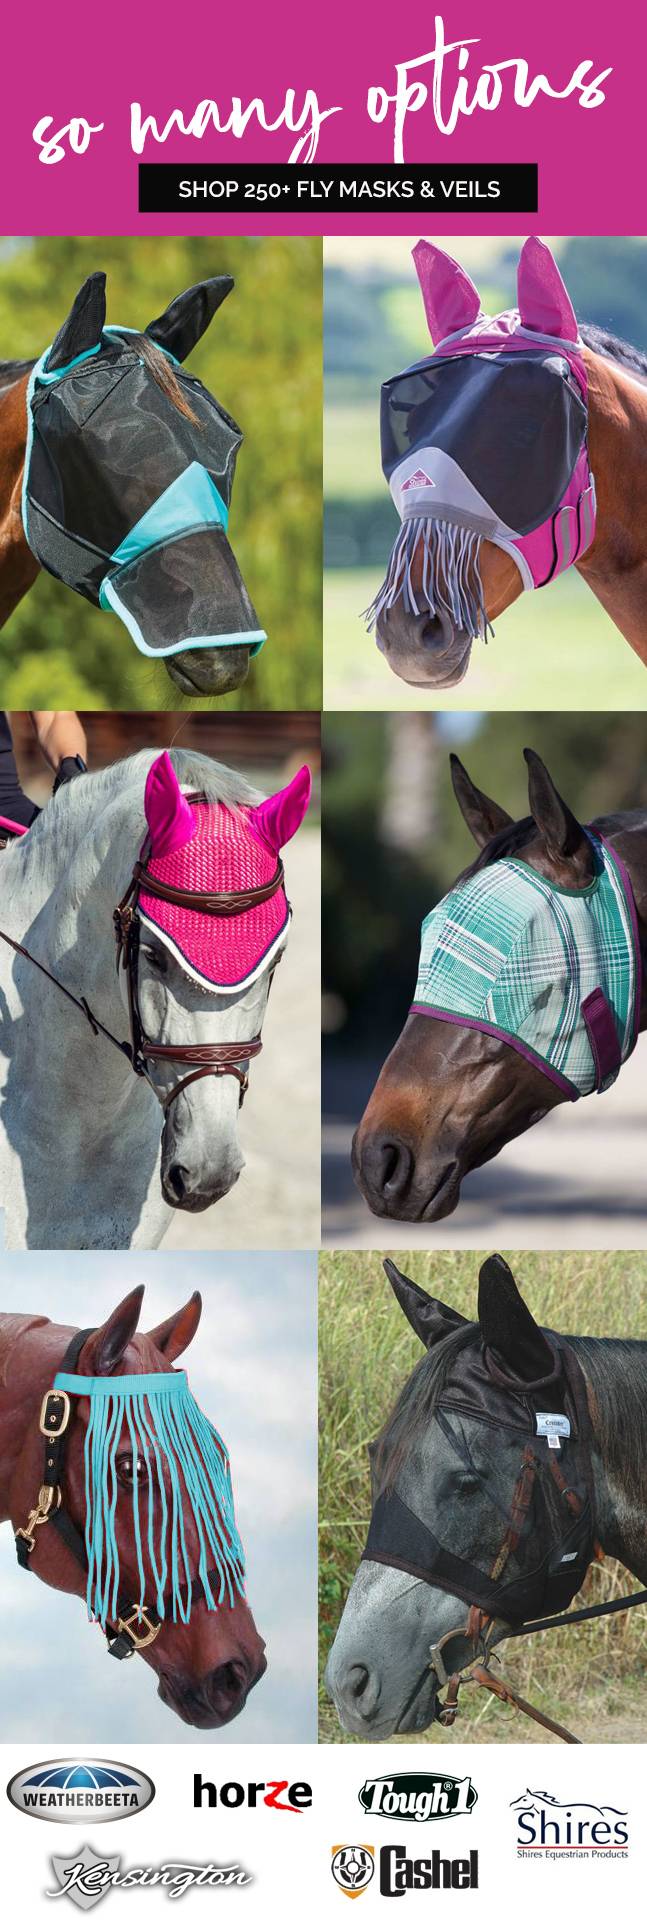 Protect Your Horse 💨 Shop 250+ Fly Masks & Veils